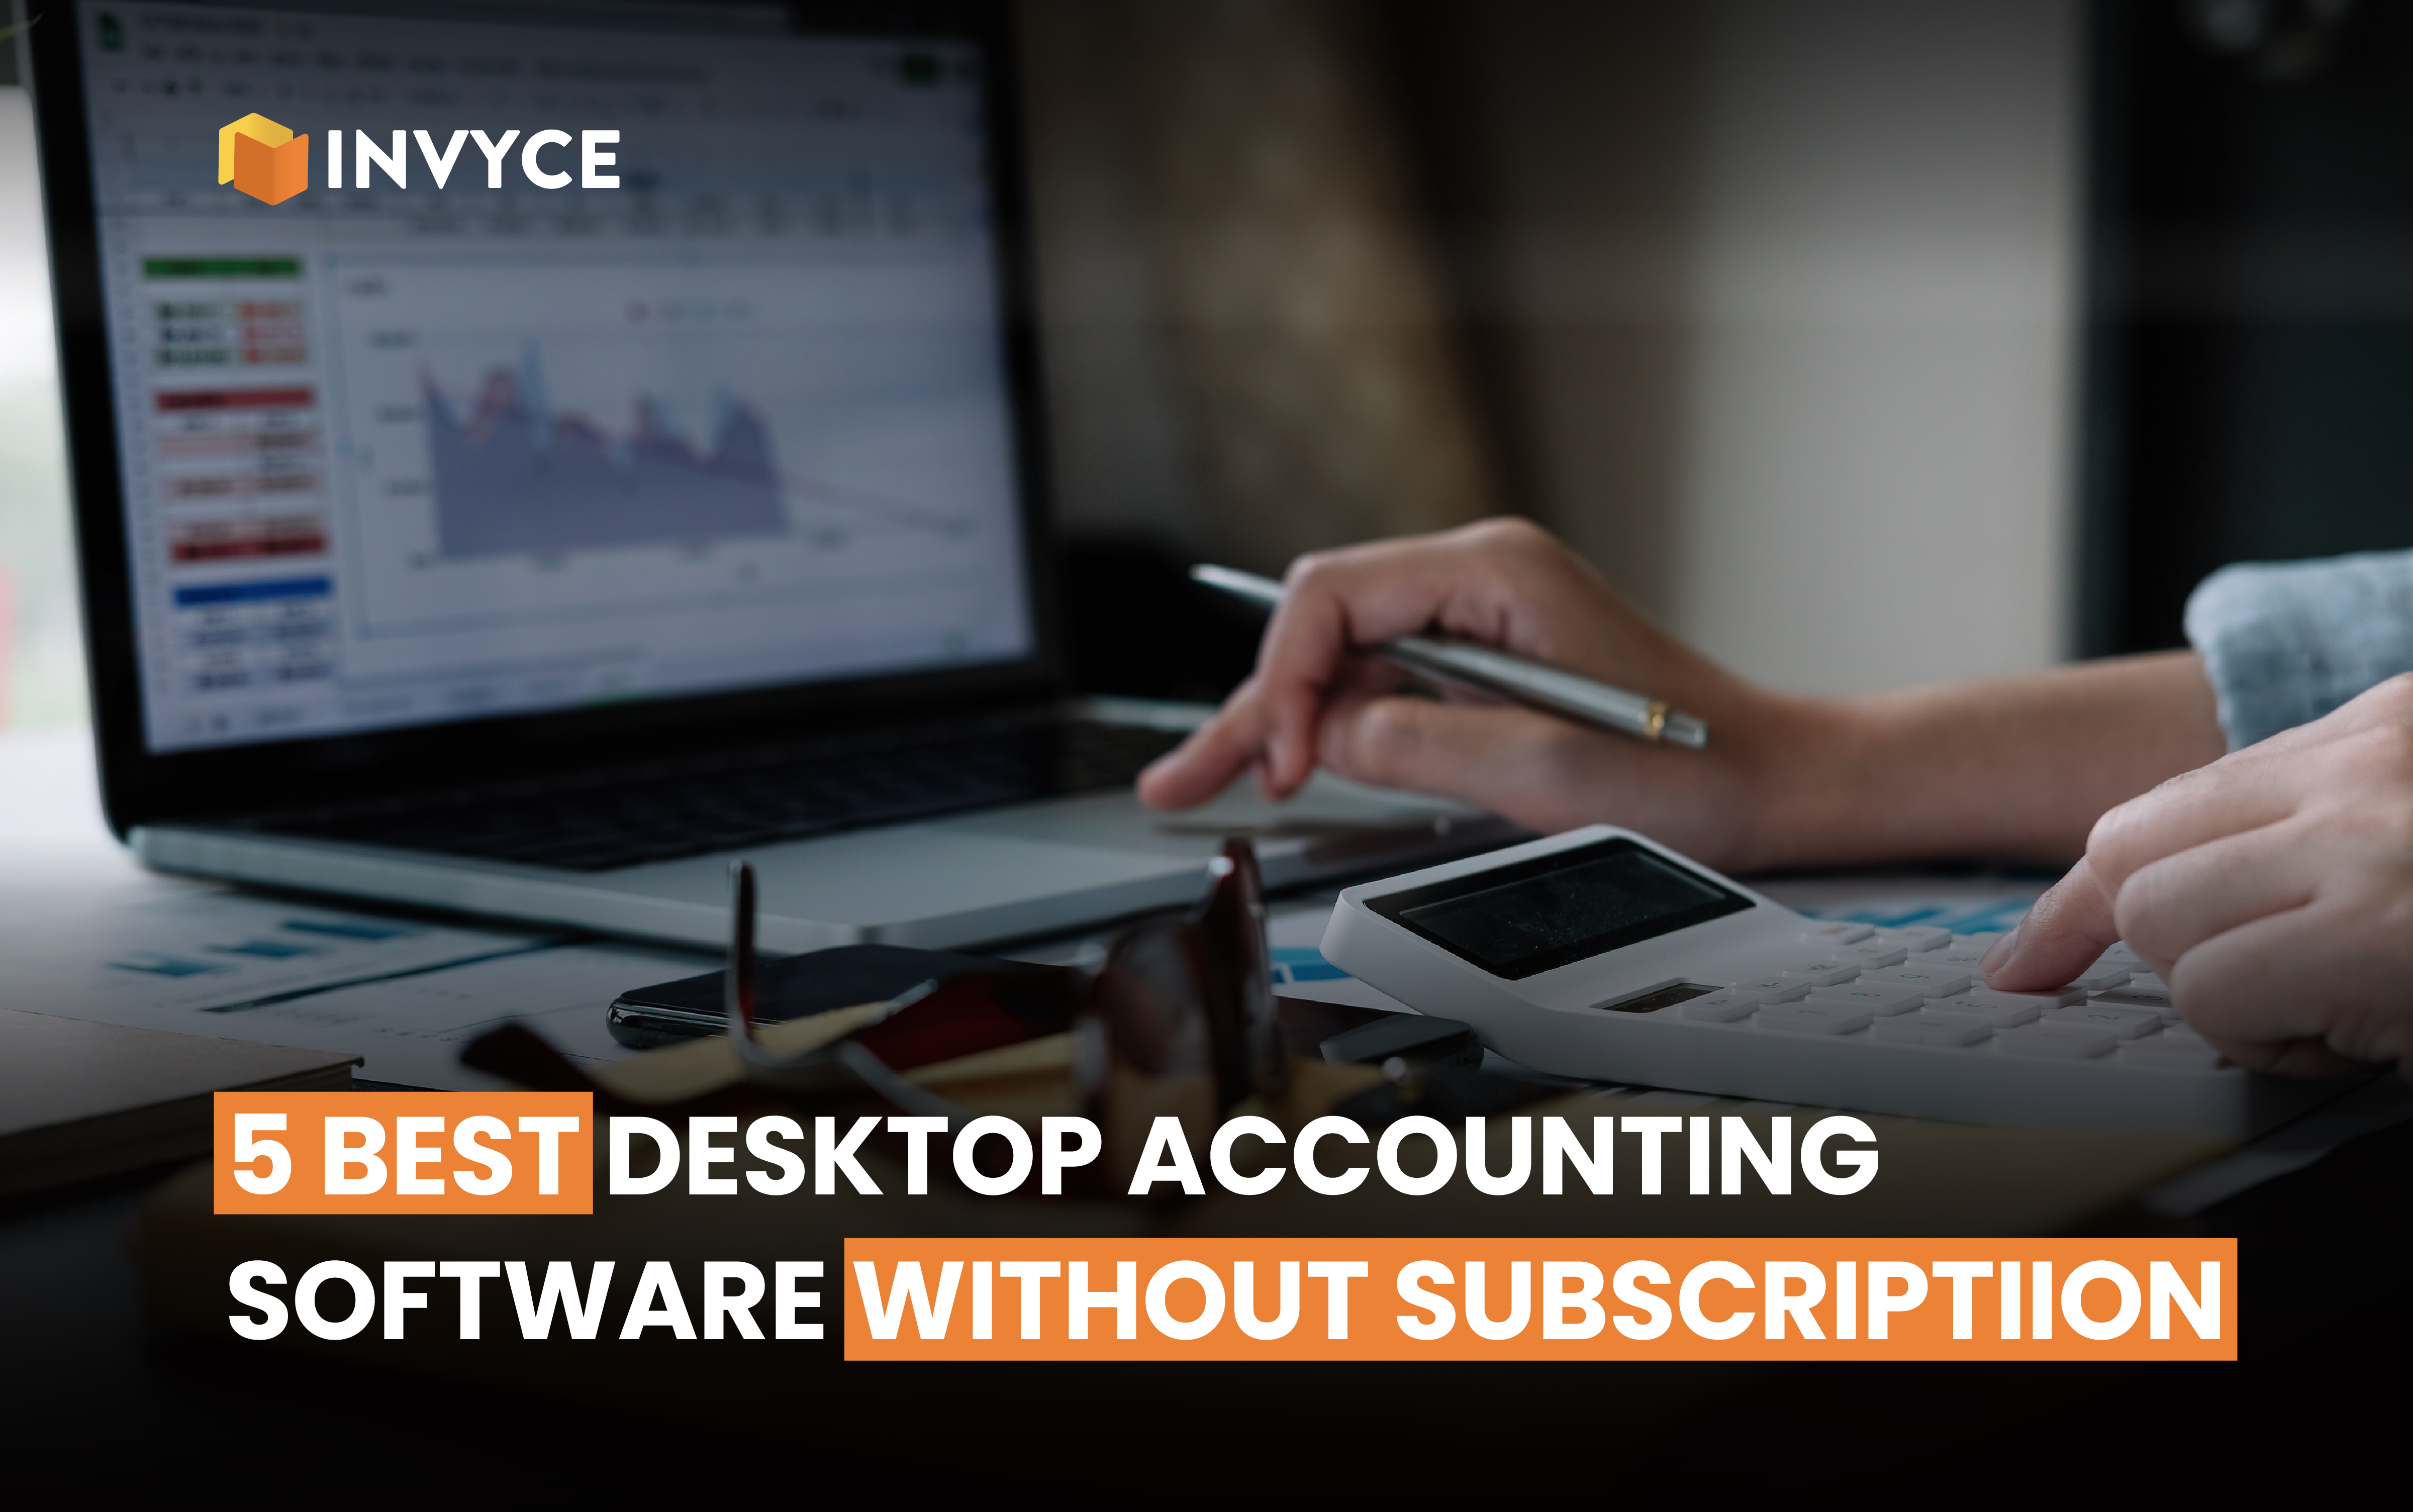 5 Best Desktop Accounting Software Without Subscription